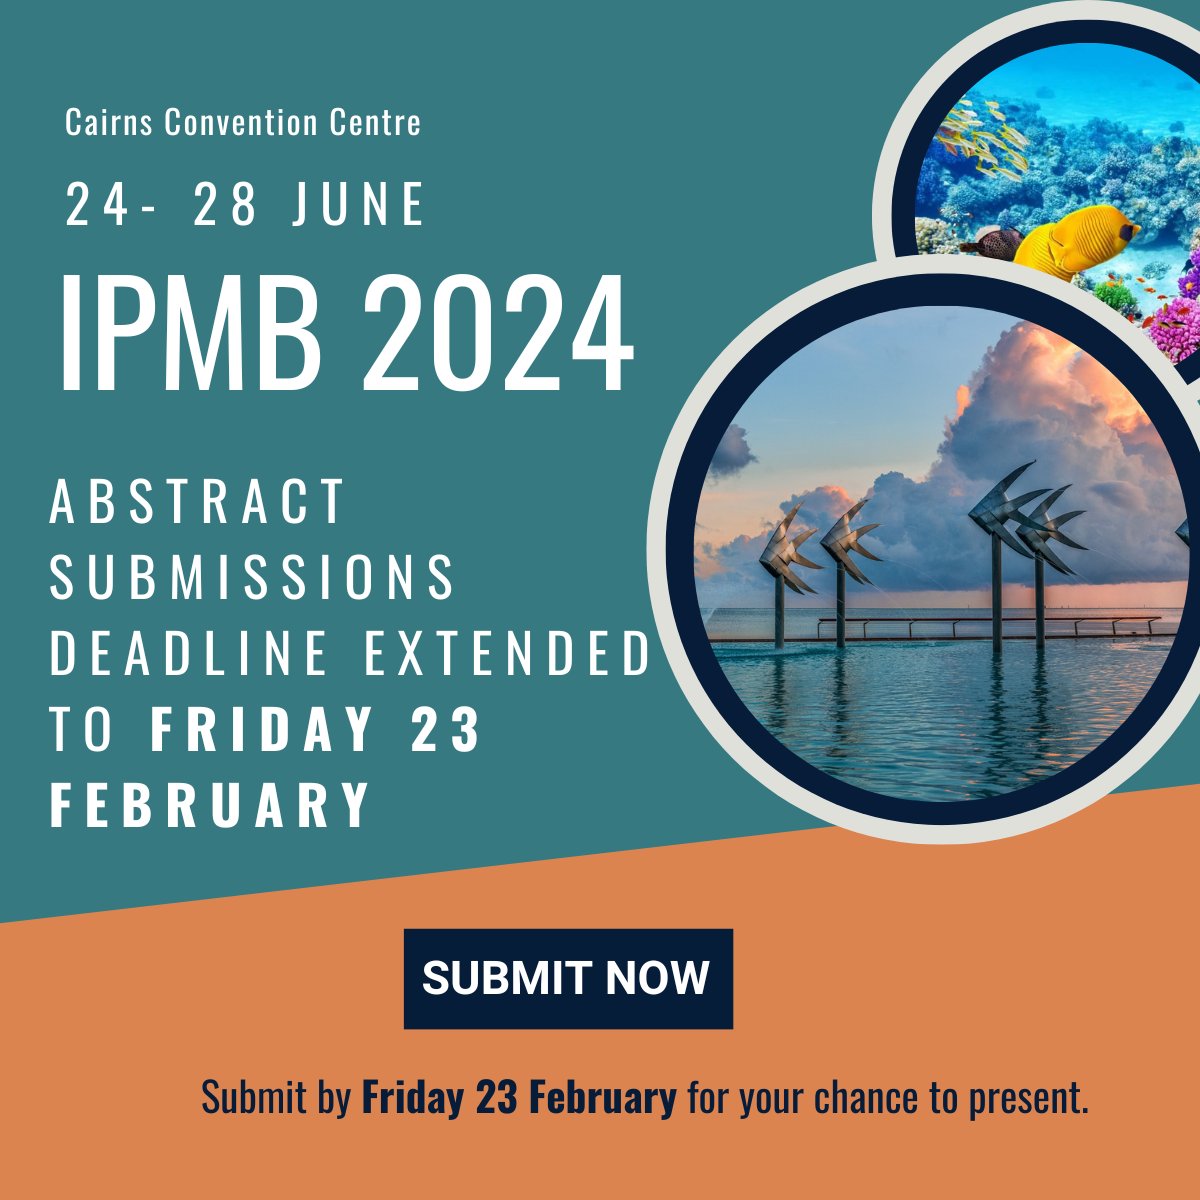 Abstract submissions deadline extended to 23 February! There’s still time to submit, visit ipmb2024.org for more information.